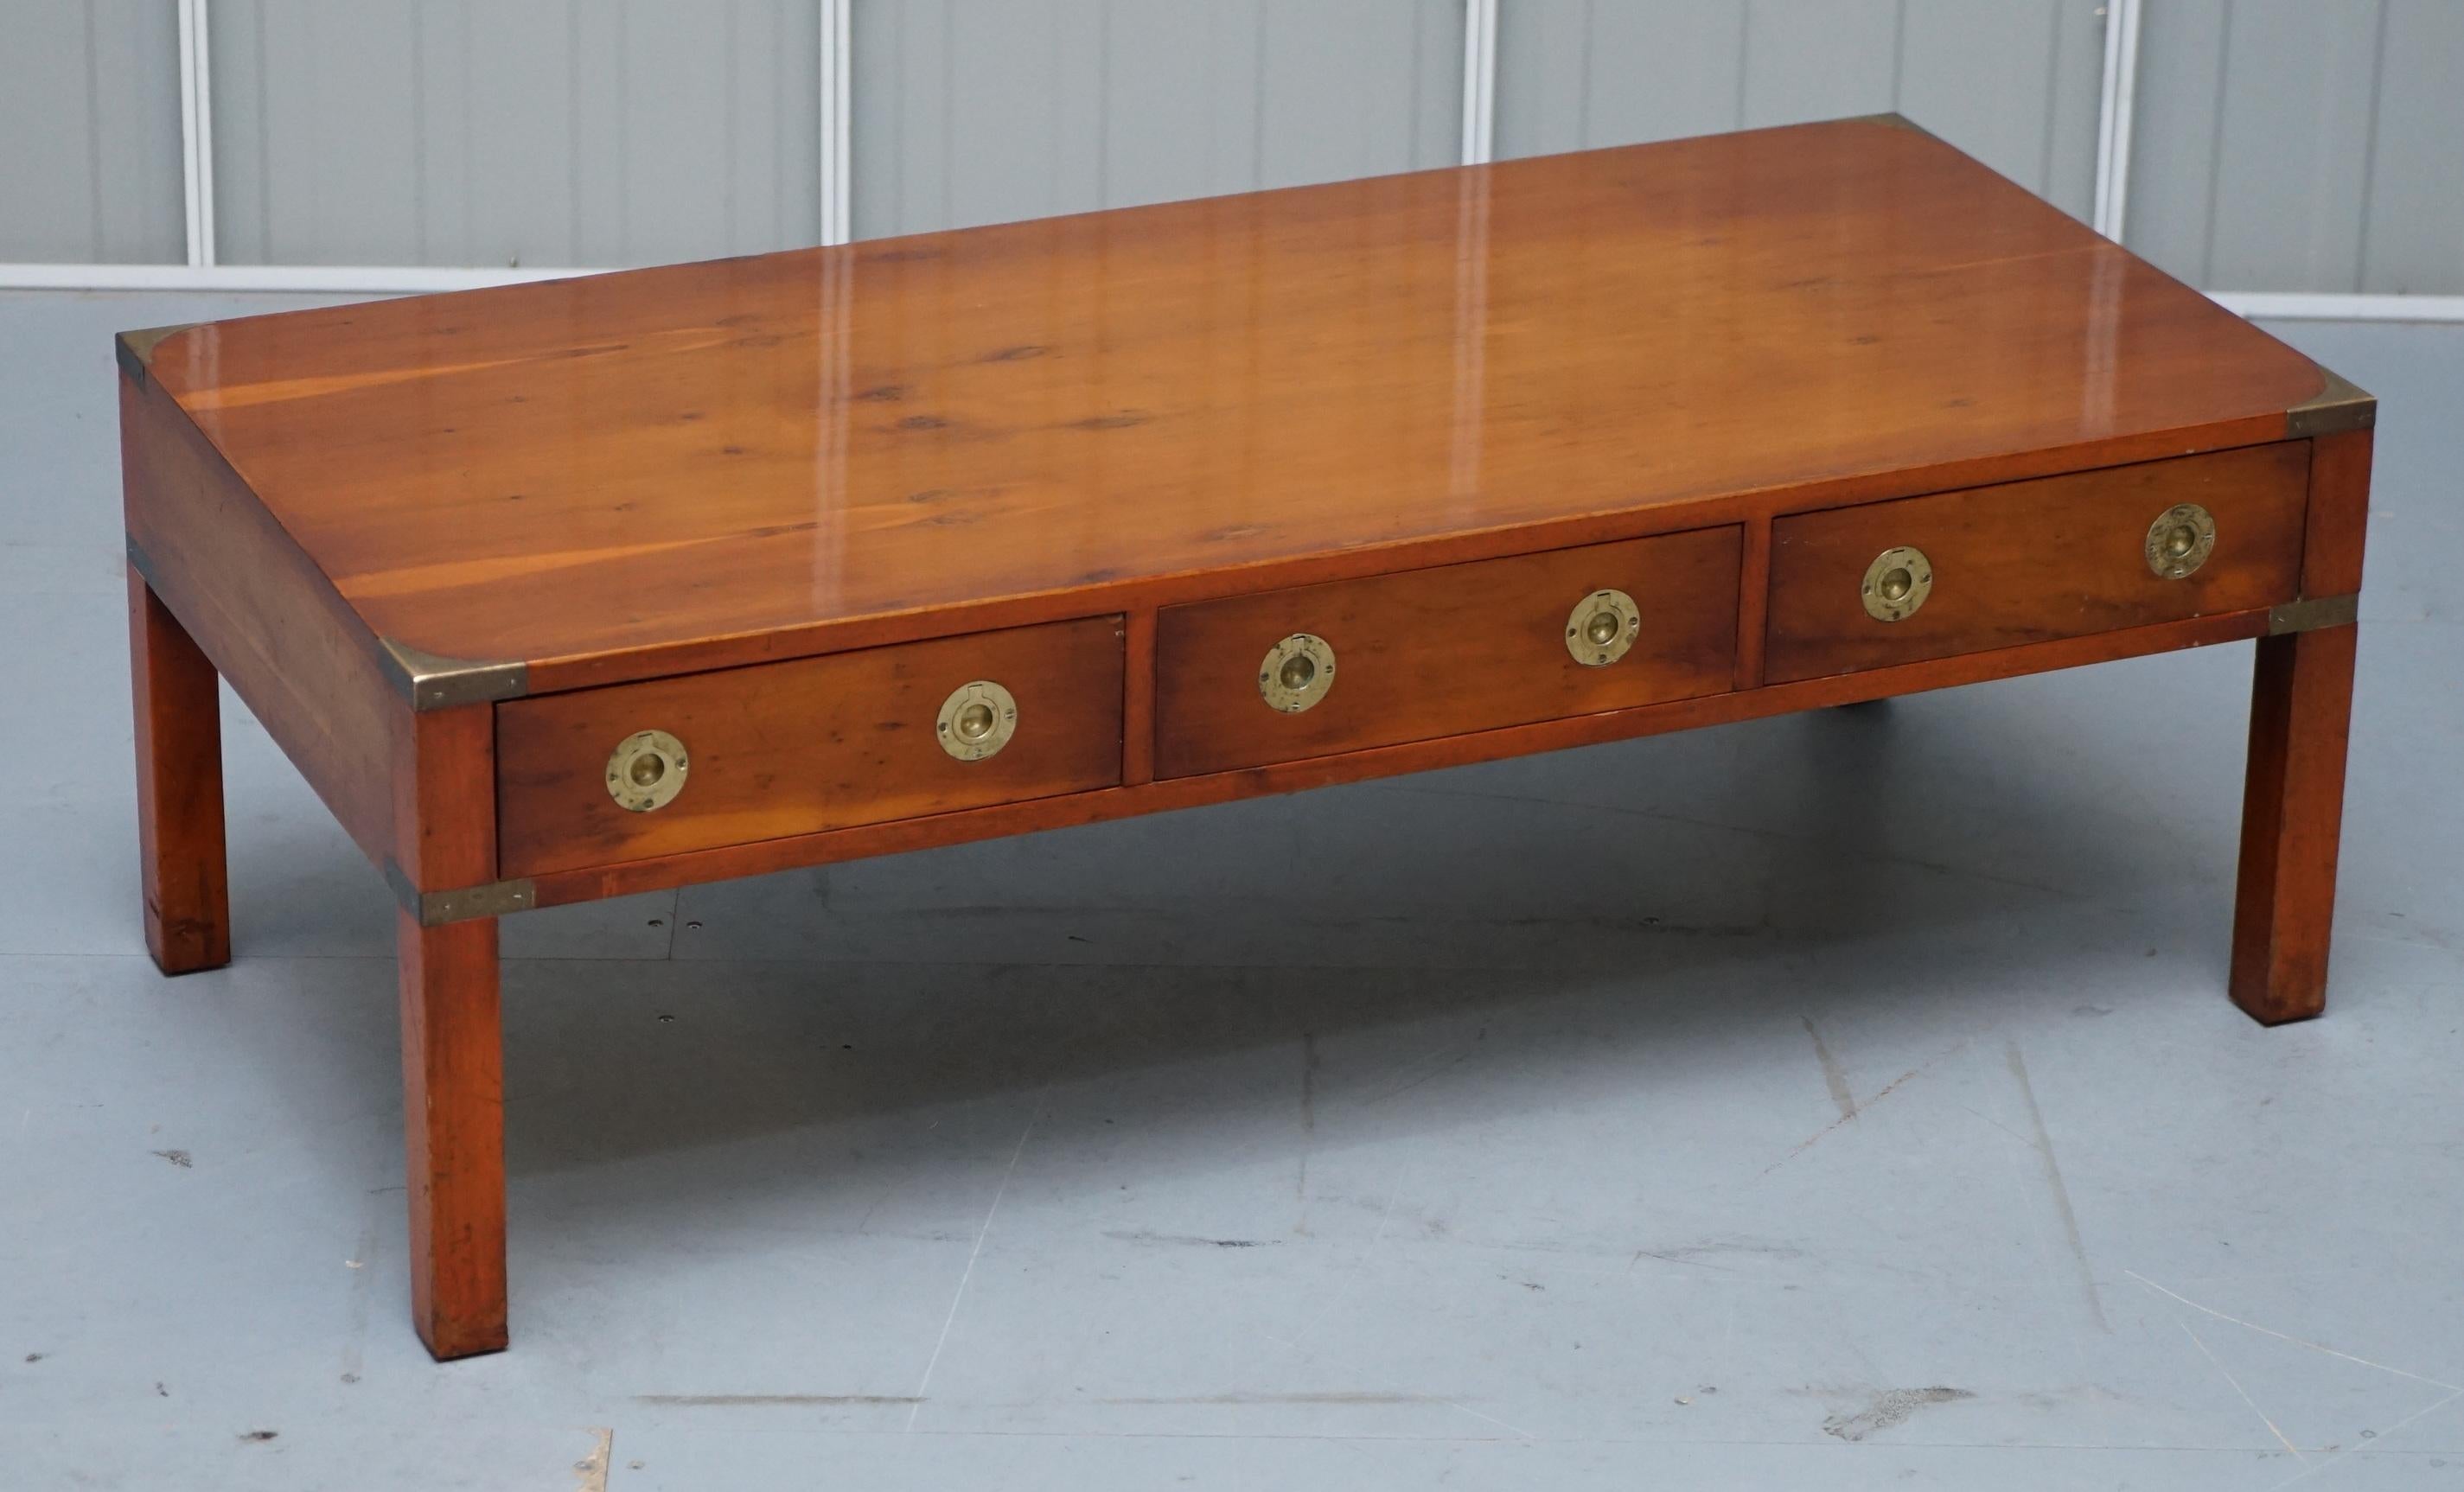 We are delighted to this stunning burr yew wood Military Campaign coffee table with three drawers on each side made by Kennedy and retailed through Harrods London

A good looking well made and decorative coffee table, we have restored it to